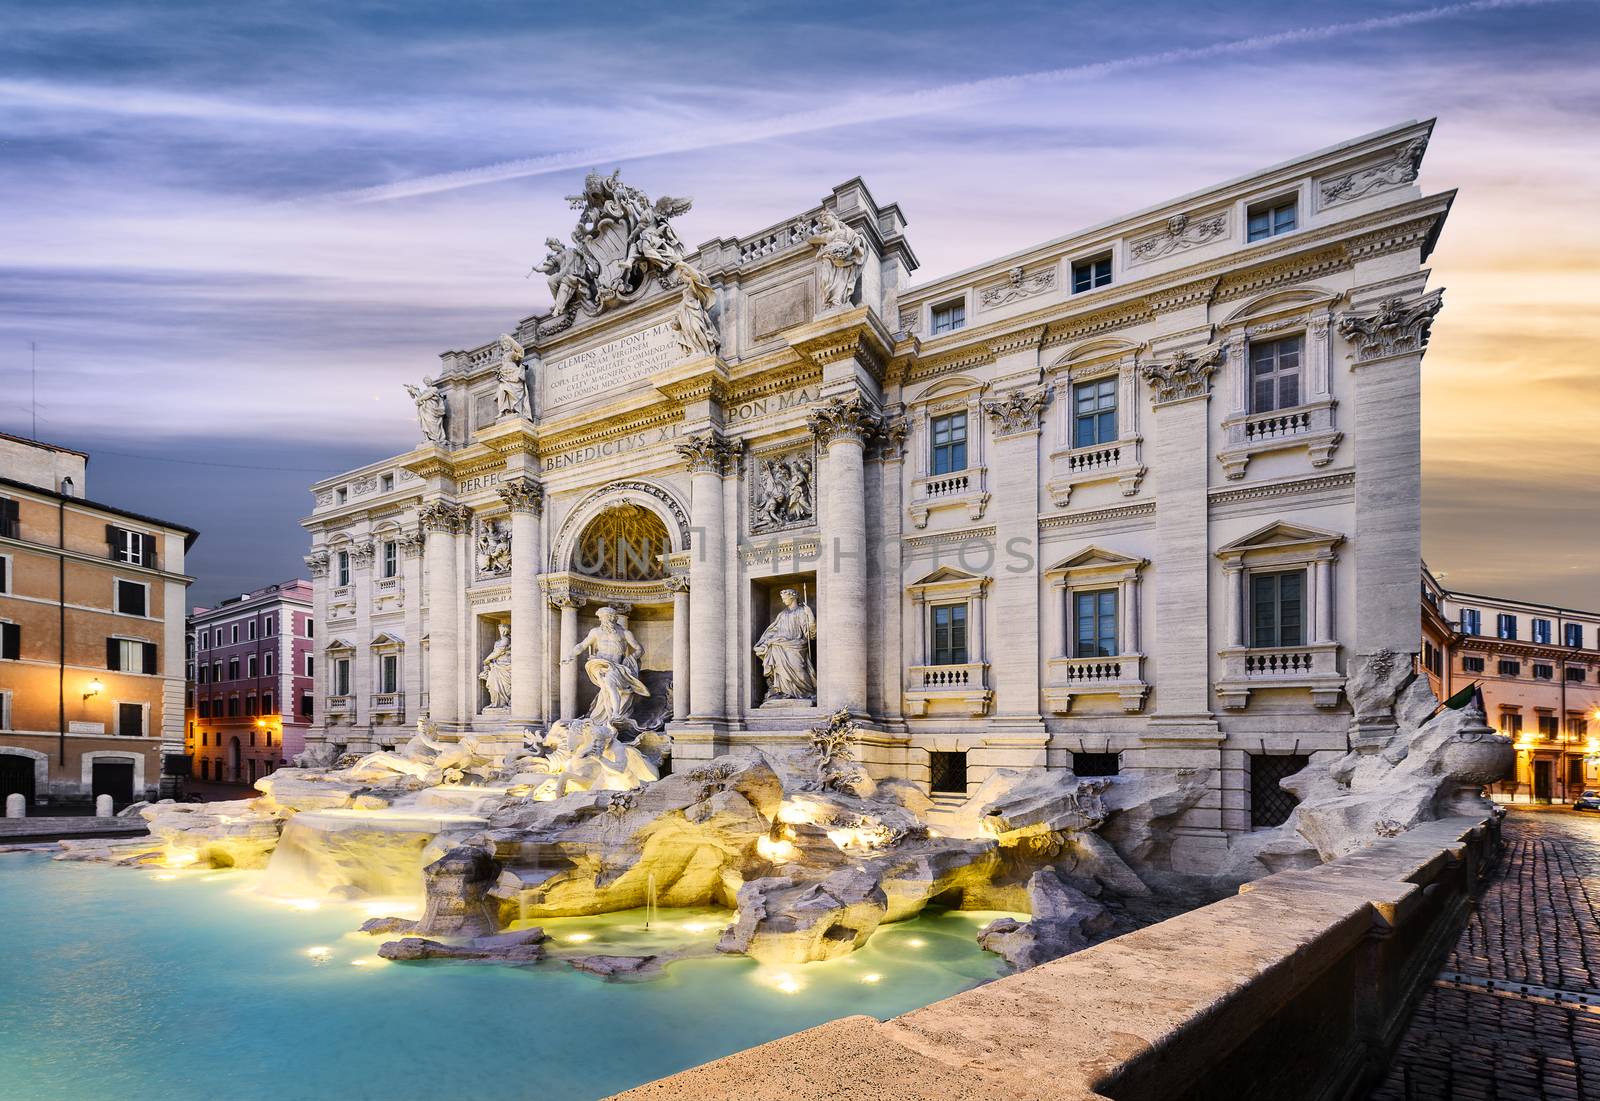 Fountain di Trevi in Rome, Italy by ventdusud